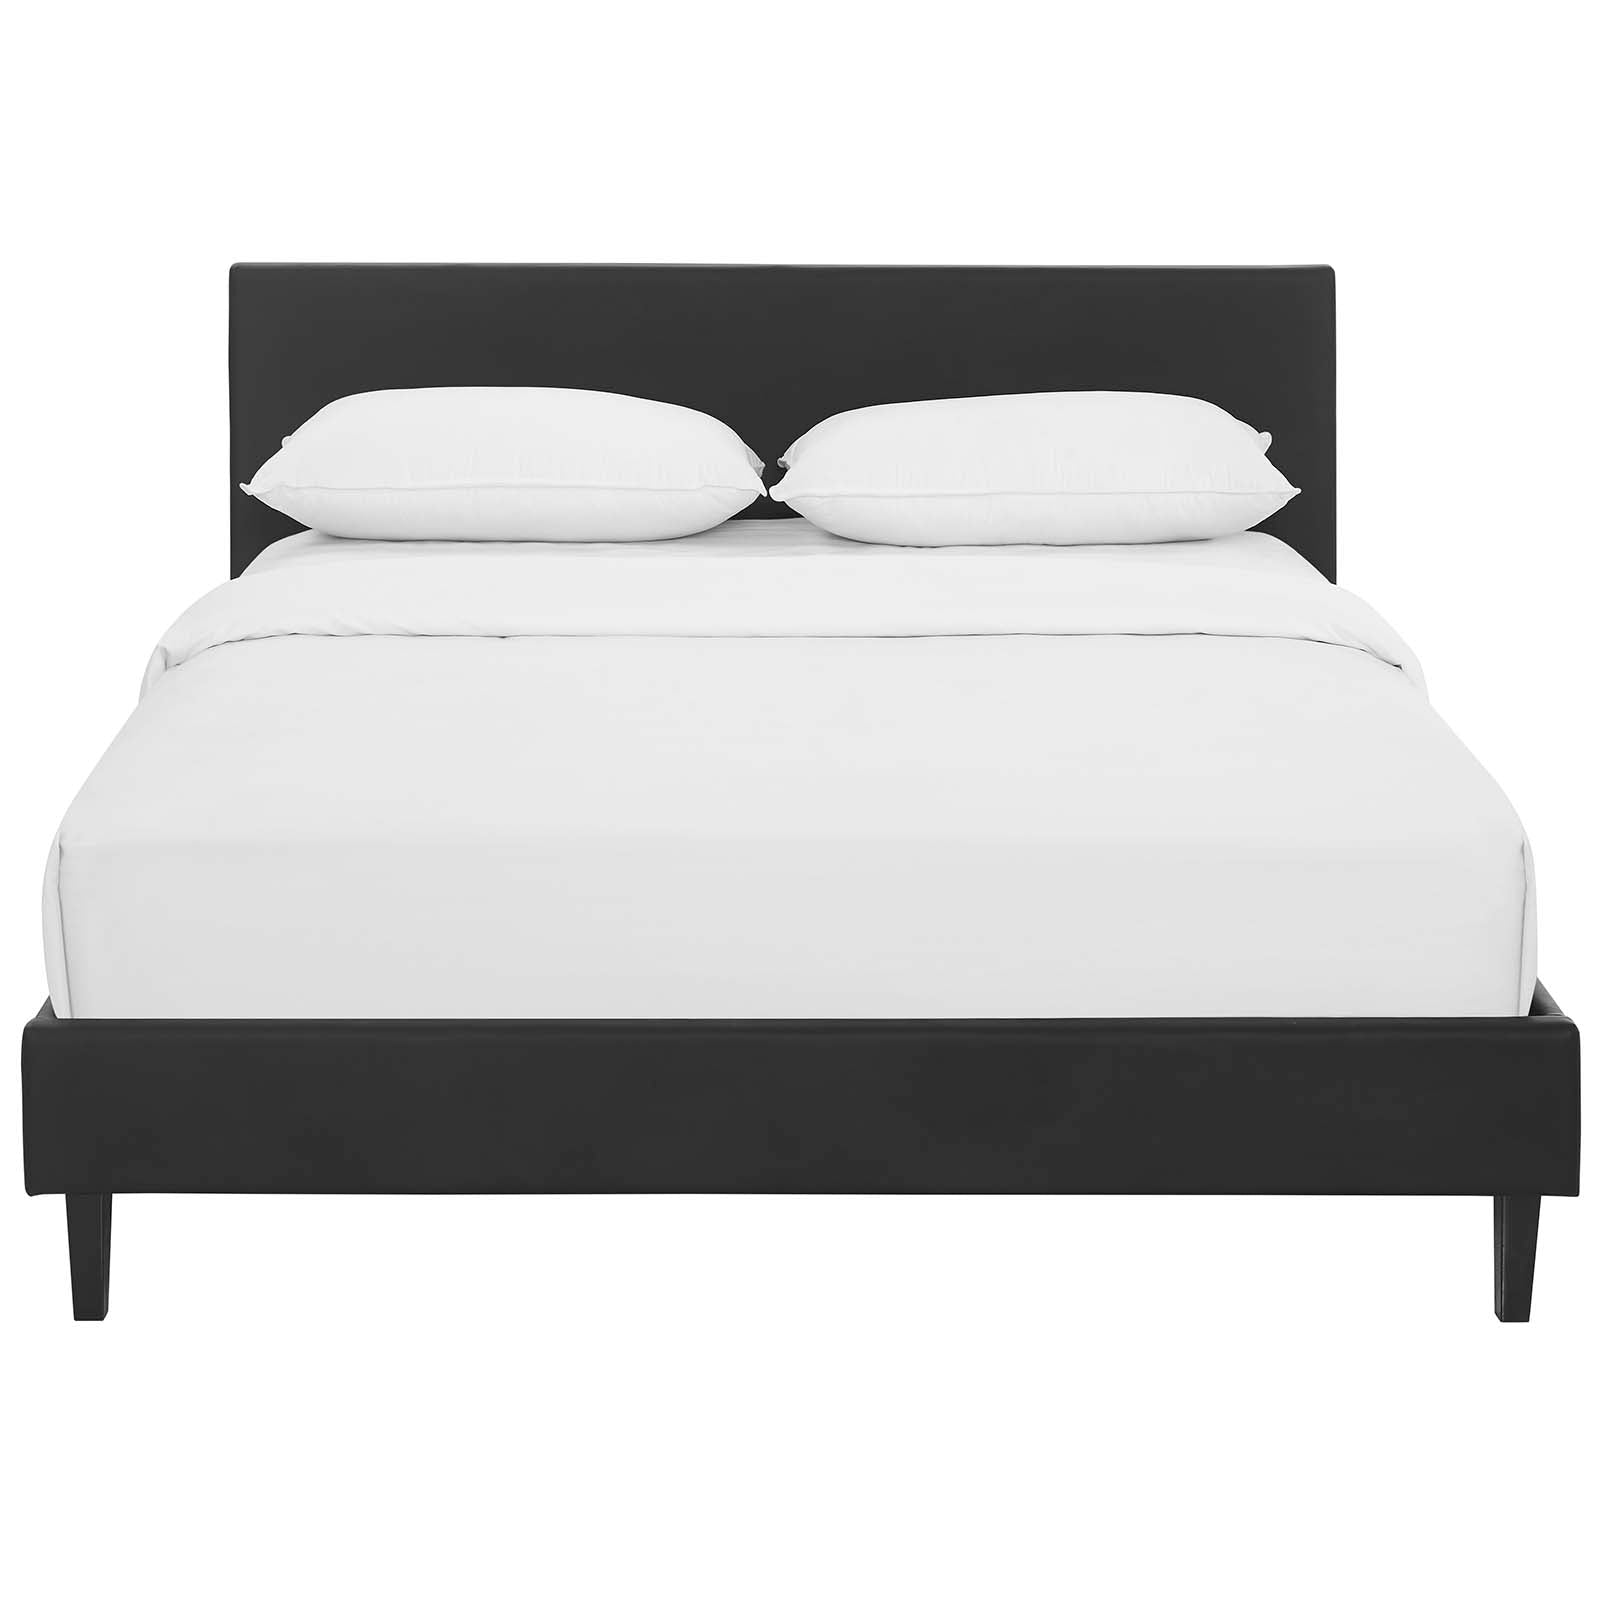 Modway Beds - Anya Full Bed Black